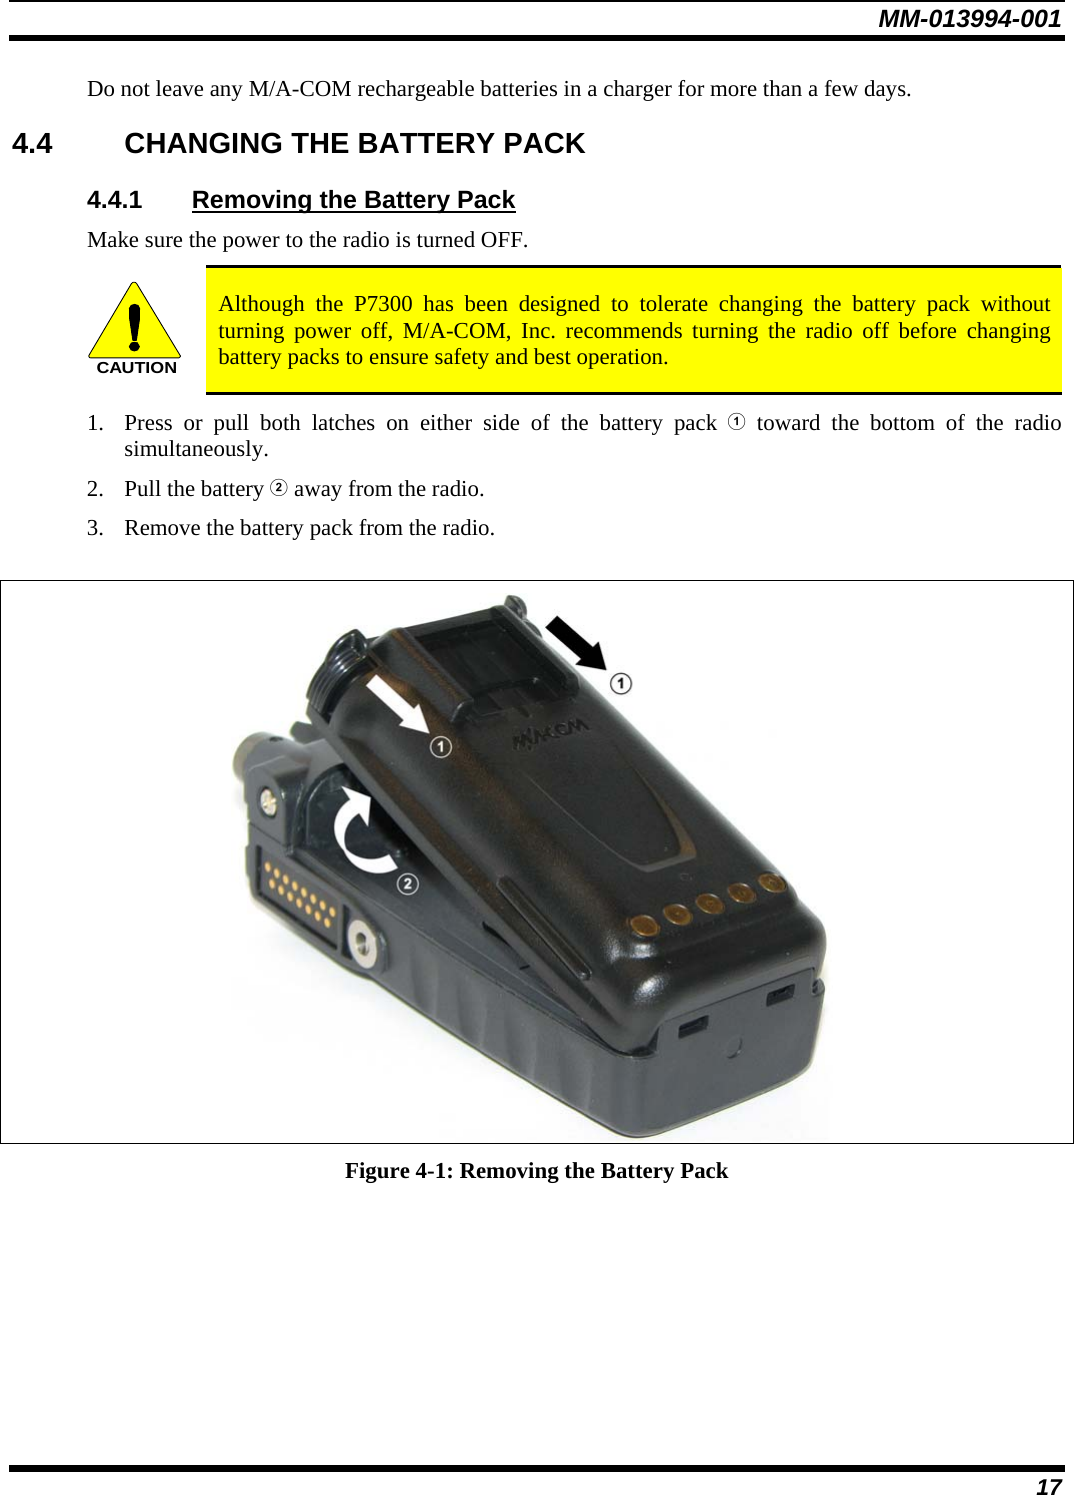 MM-013994-001 17 Do not leave any M/A-COM rechargeable batteries in a charger for more than a few days.  4.4  CHANGING THE BATTERY PACK 4.4.1  Removing the Battery Pack Make sure the power to the radio is turned OFF. CAUTION Although the P7300 has been designed to tolerate changing the battery pack without turning power off, M/A-COM, Inc. recommends turning the radio off before changing battery packs to ensure safety and best operation. 1. Press or pull both latches on either side of the battery pack  toward the bottom of the radio simultaneously.  2. Pull the battery  away from the radio. 3. Remove the battery pack from the radio.   Figure 4-1: Removing the Battery Pack 